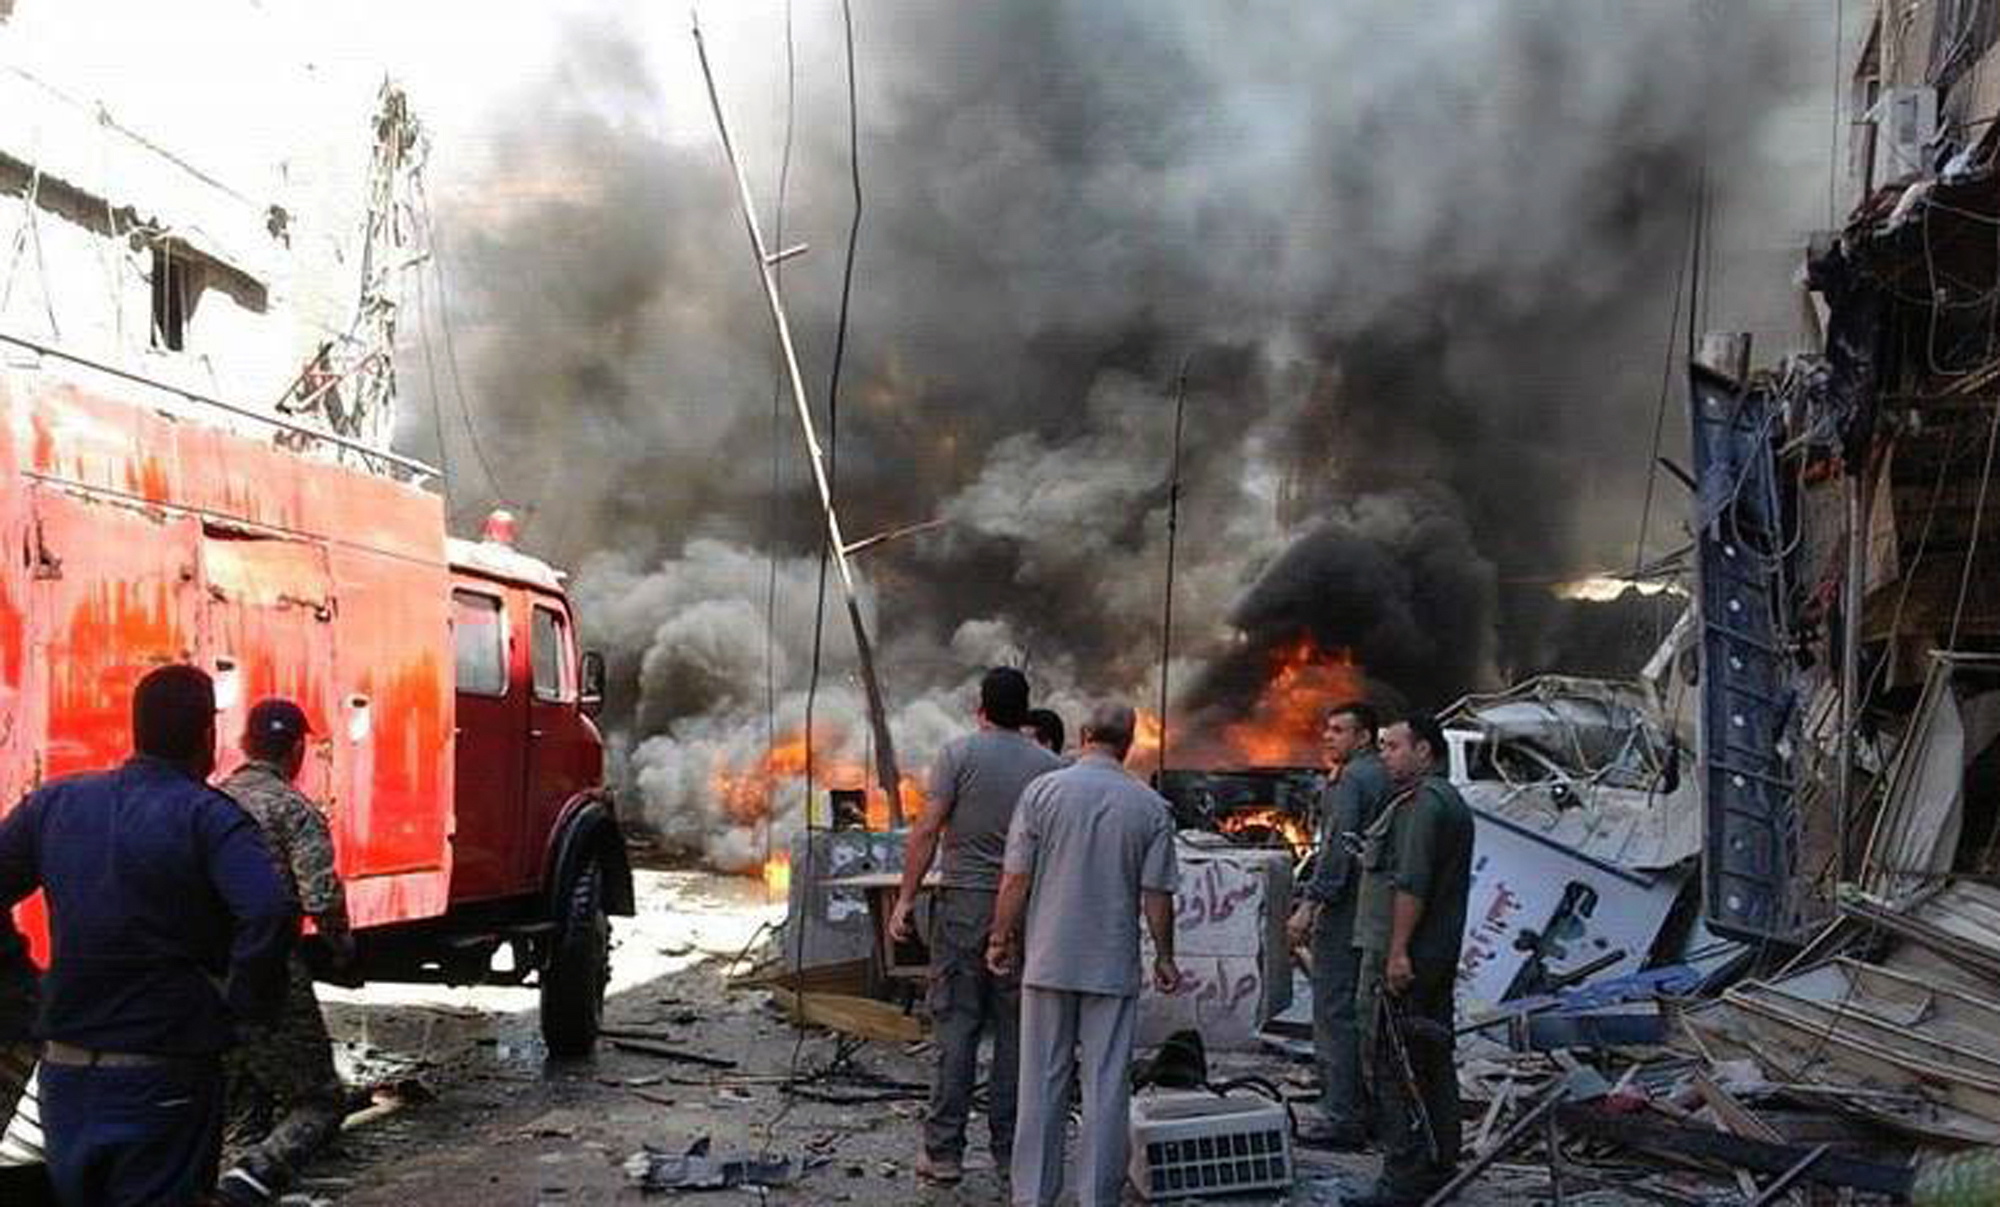 In this photo released by the Syrian official news agency SANA, Syrians gather around burning buildings after a bomb attack at the Sayyida Zeinab suburb, Damascus, Syria, Saturday, June 11, 2016. Two bombs went off Saturday near the Syrian capital, killing at least eight people and wounding over a dozen others in the latest attack to hit the predominantly Shiite area in recent months, state TV and an opposition activist group said.